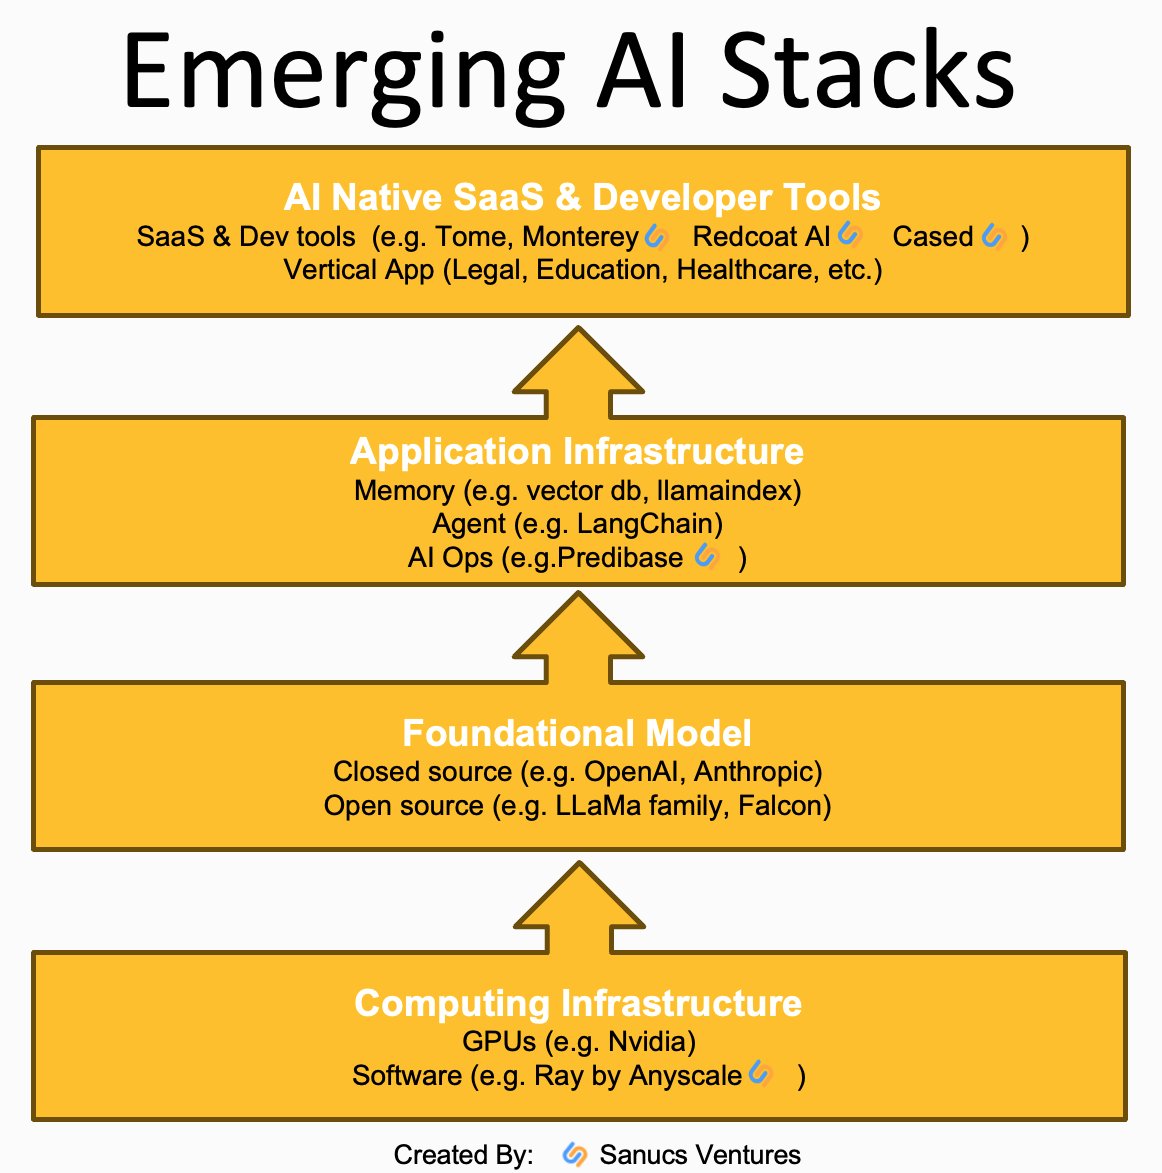 As AI technologies continue to evolve rapidly, our team at @SancusVentures sketch out #AIinfrastructure stacks to help us navigate and map emerging #AIinnovations and #aiinvestment opportunities.